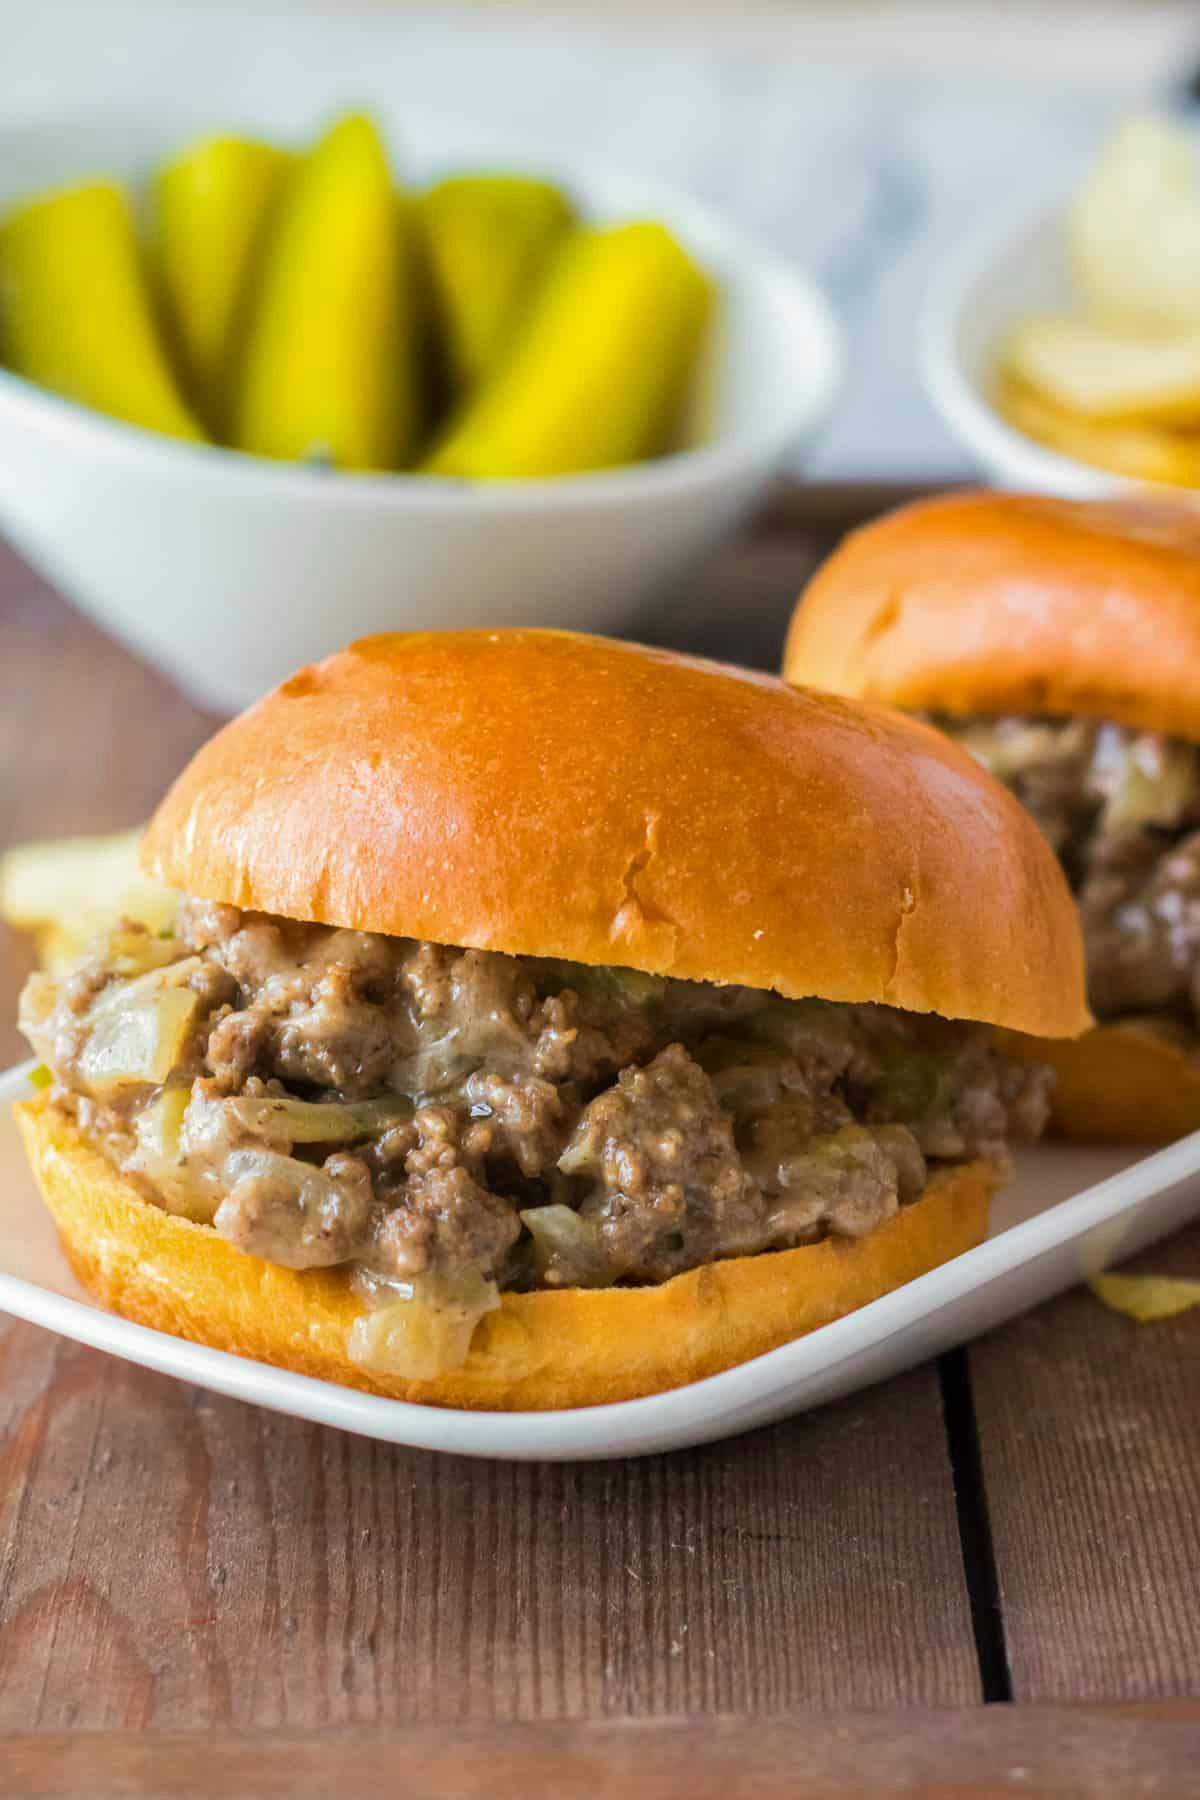 Philly cheesestake sloppy joes on brioche buns with pickle spears in background.